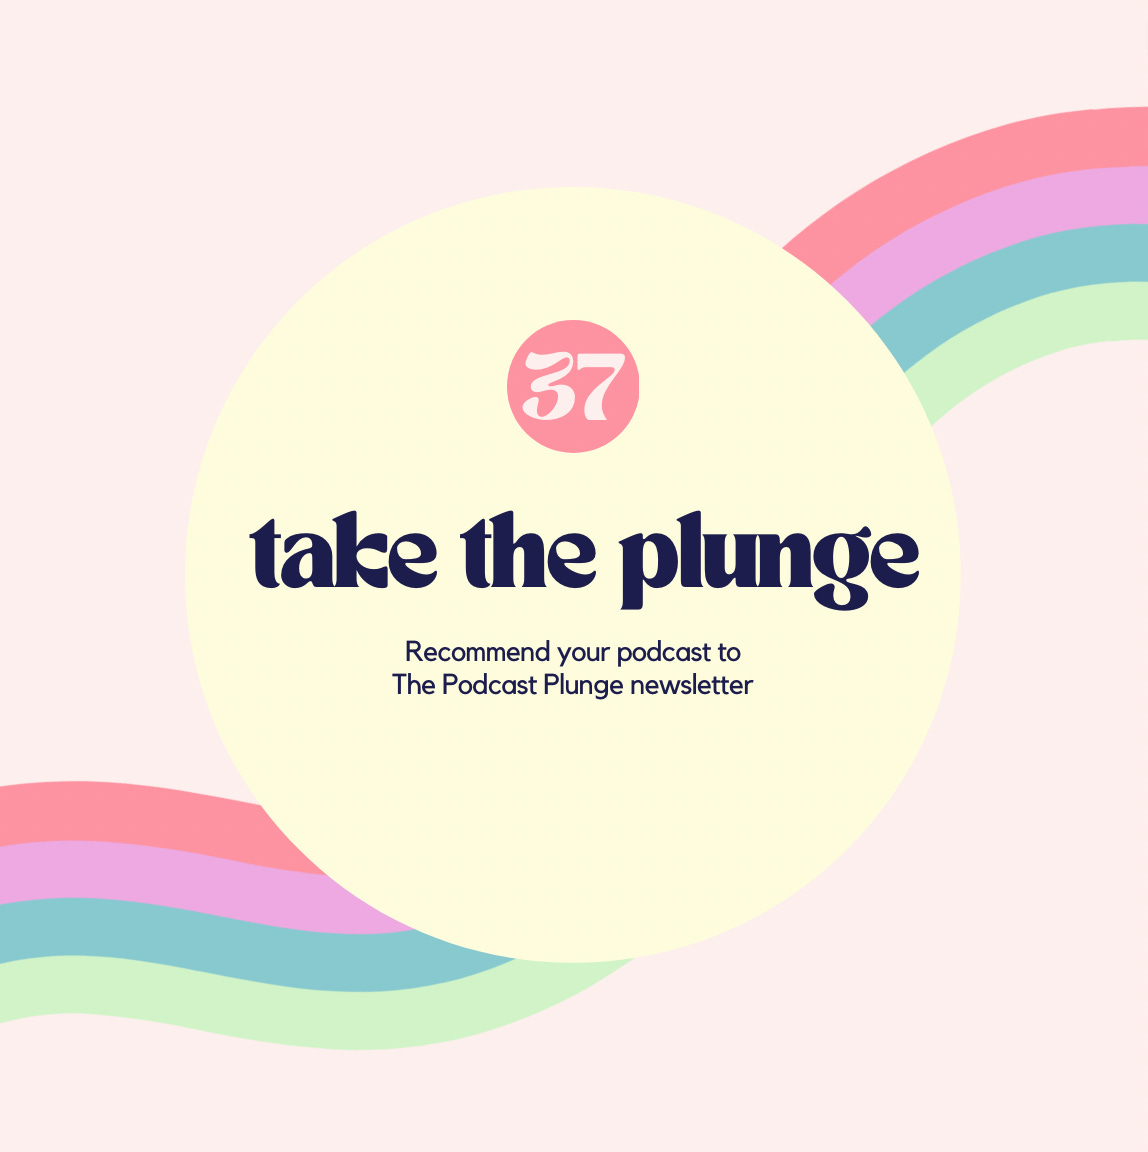 Take the plunge and recommend your podcast to The Podcast Plunge newsletter